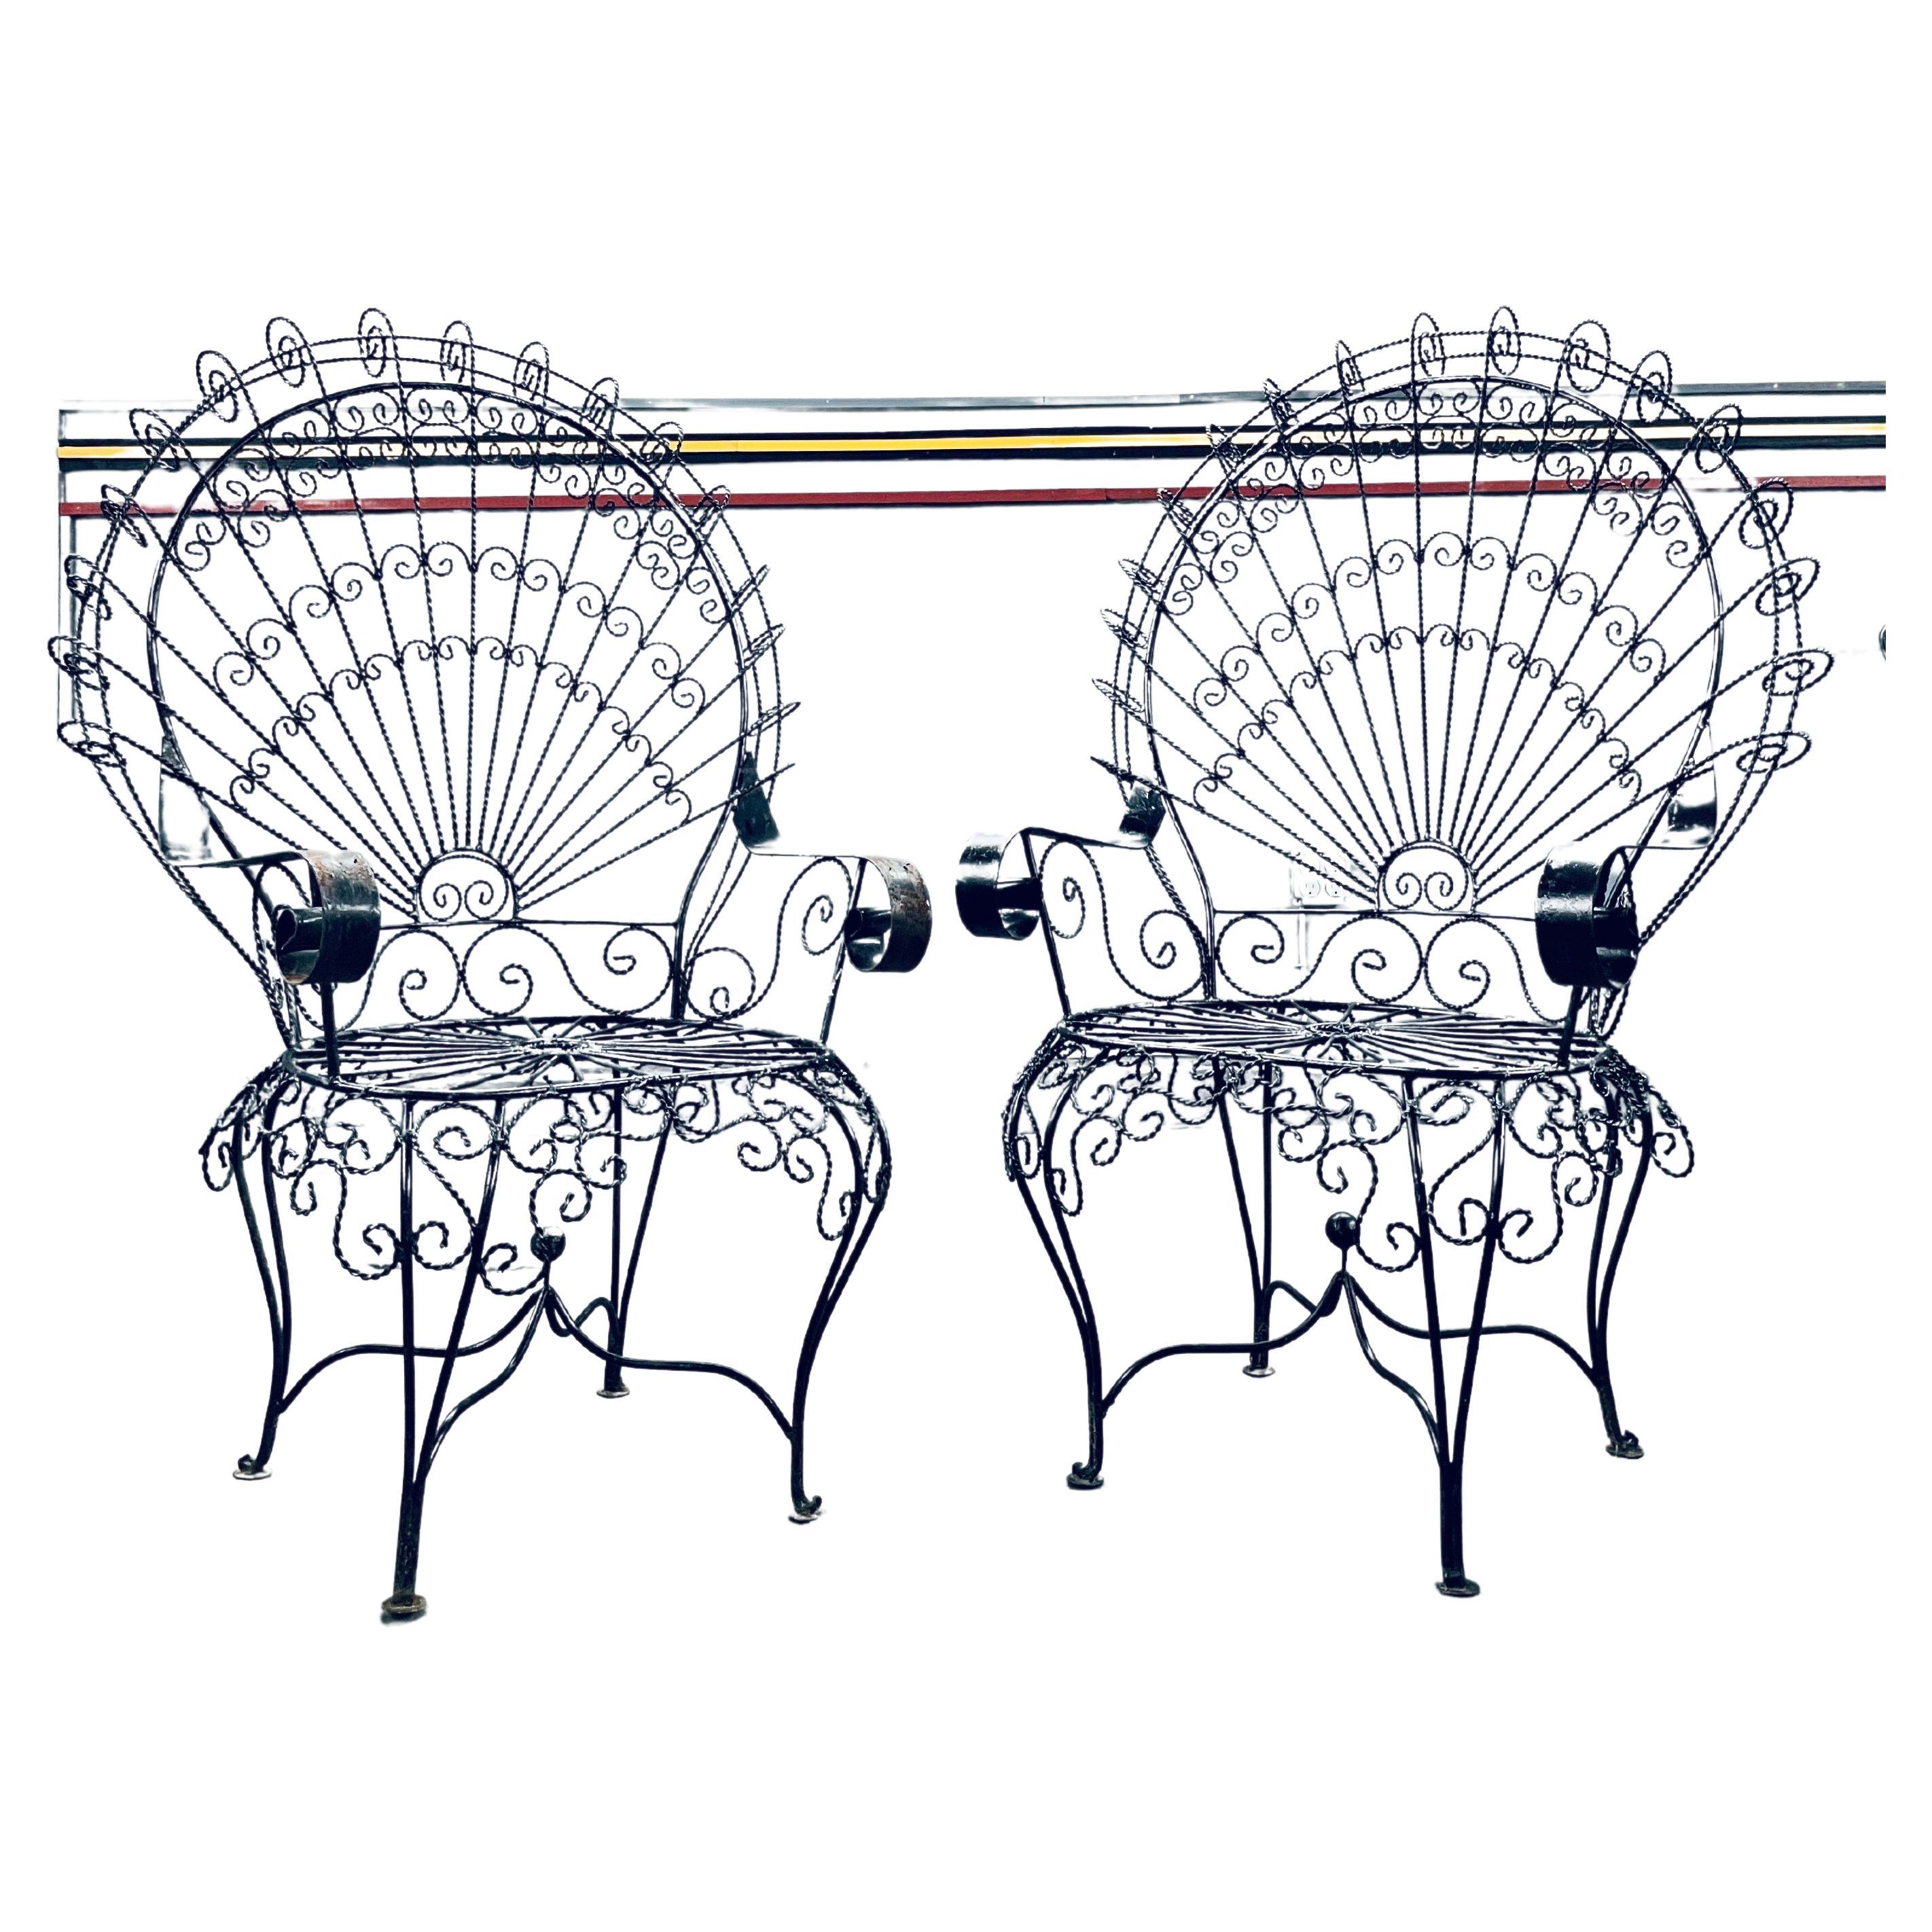 Vintage Salterini Peacock Chair -A Pair

Signature High Back Chairs Generously proportioned with wide seating and reaching 4 feet tall. Excellent scrolled detail work of twisted iron free from breaks. These chairs can be painted or sandblasted and